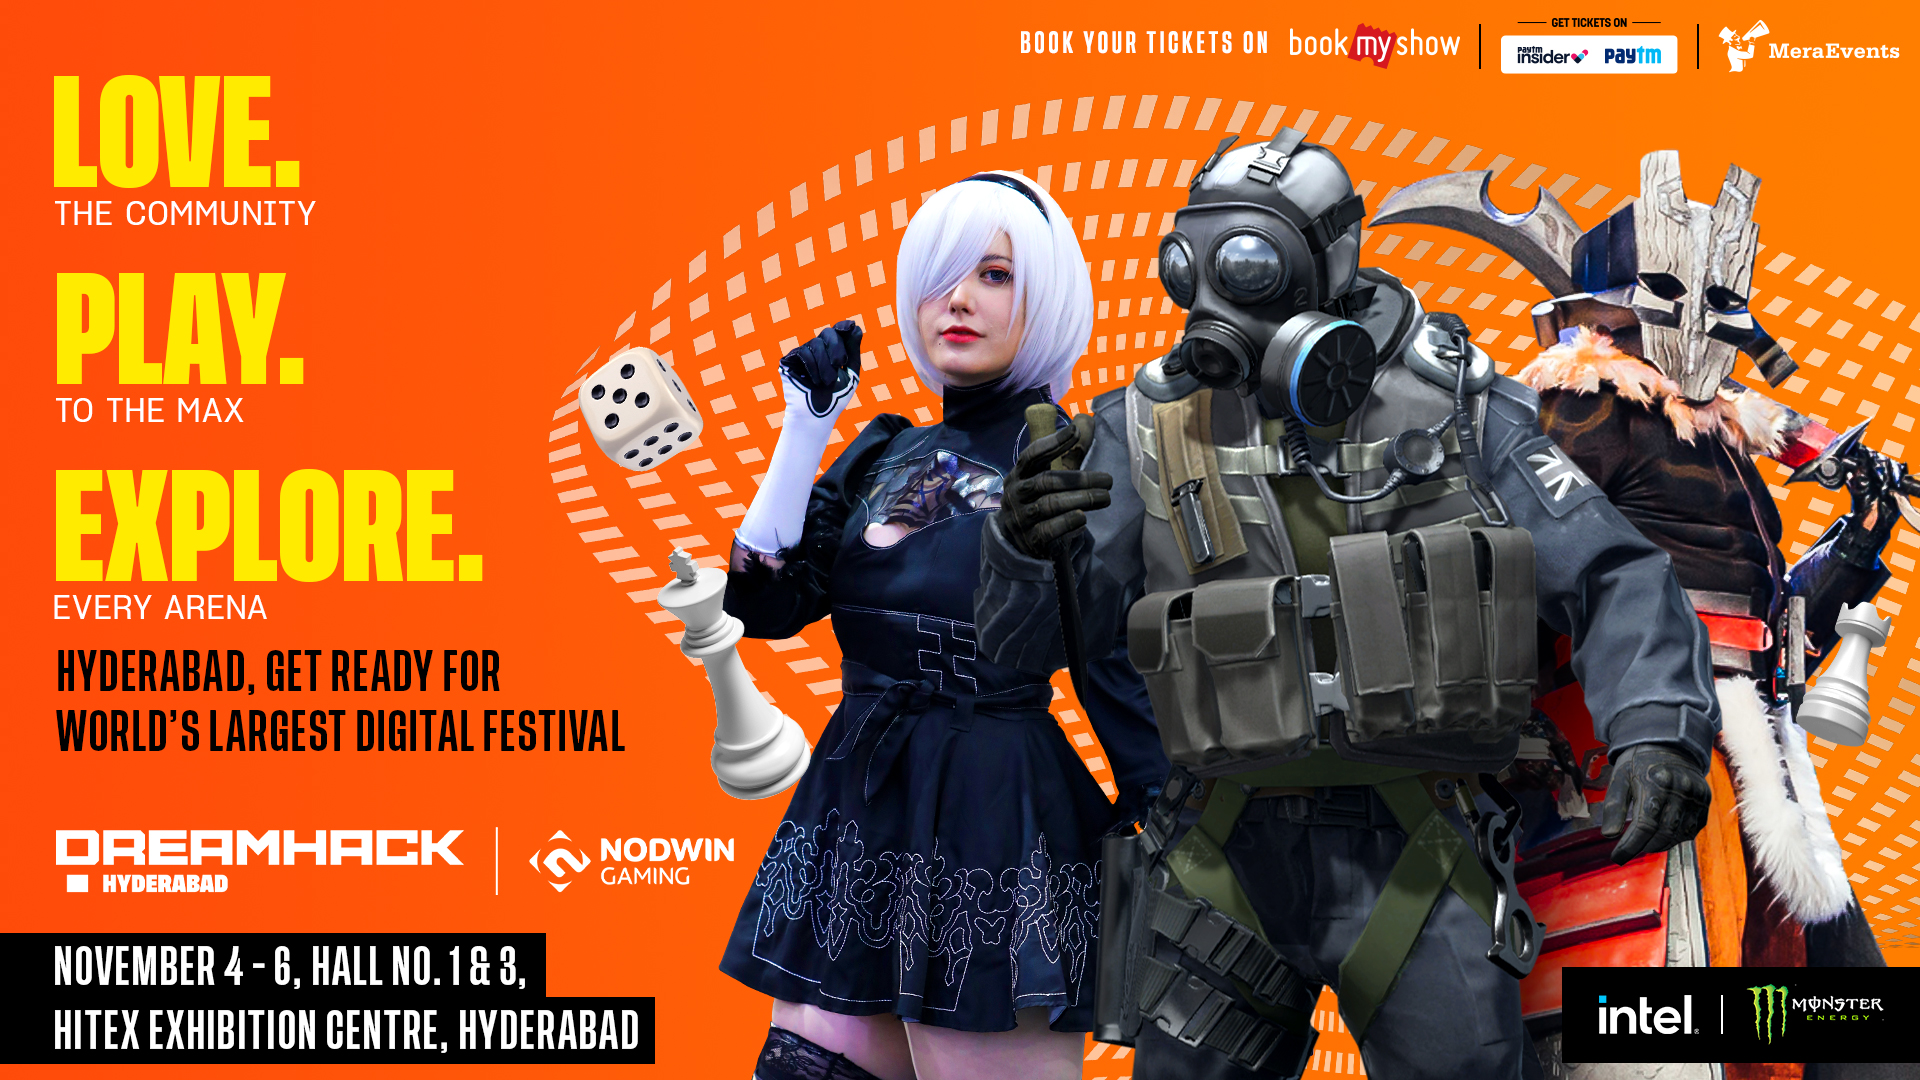 It is Game On - NODWIN Gaming brings the third and biggest edition of DREAMHACK to Hyderabad